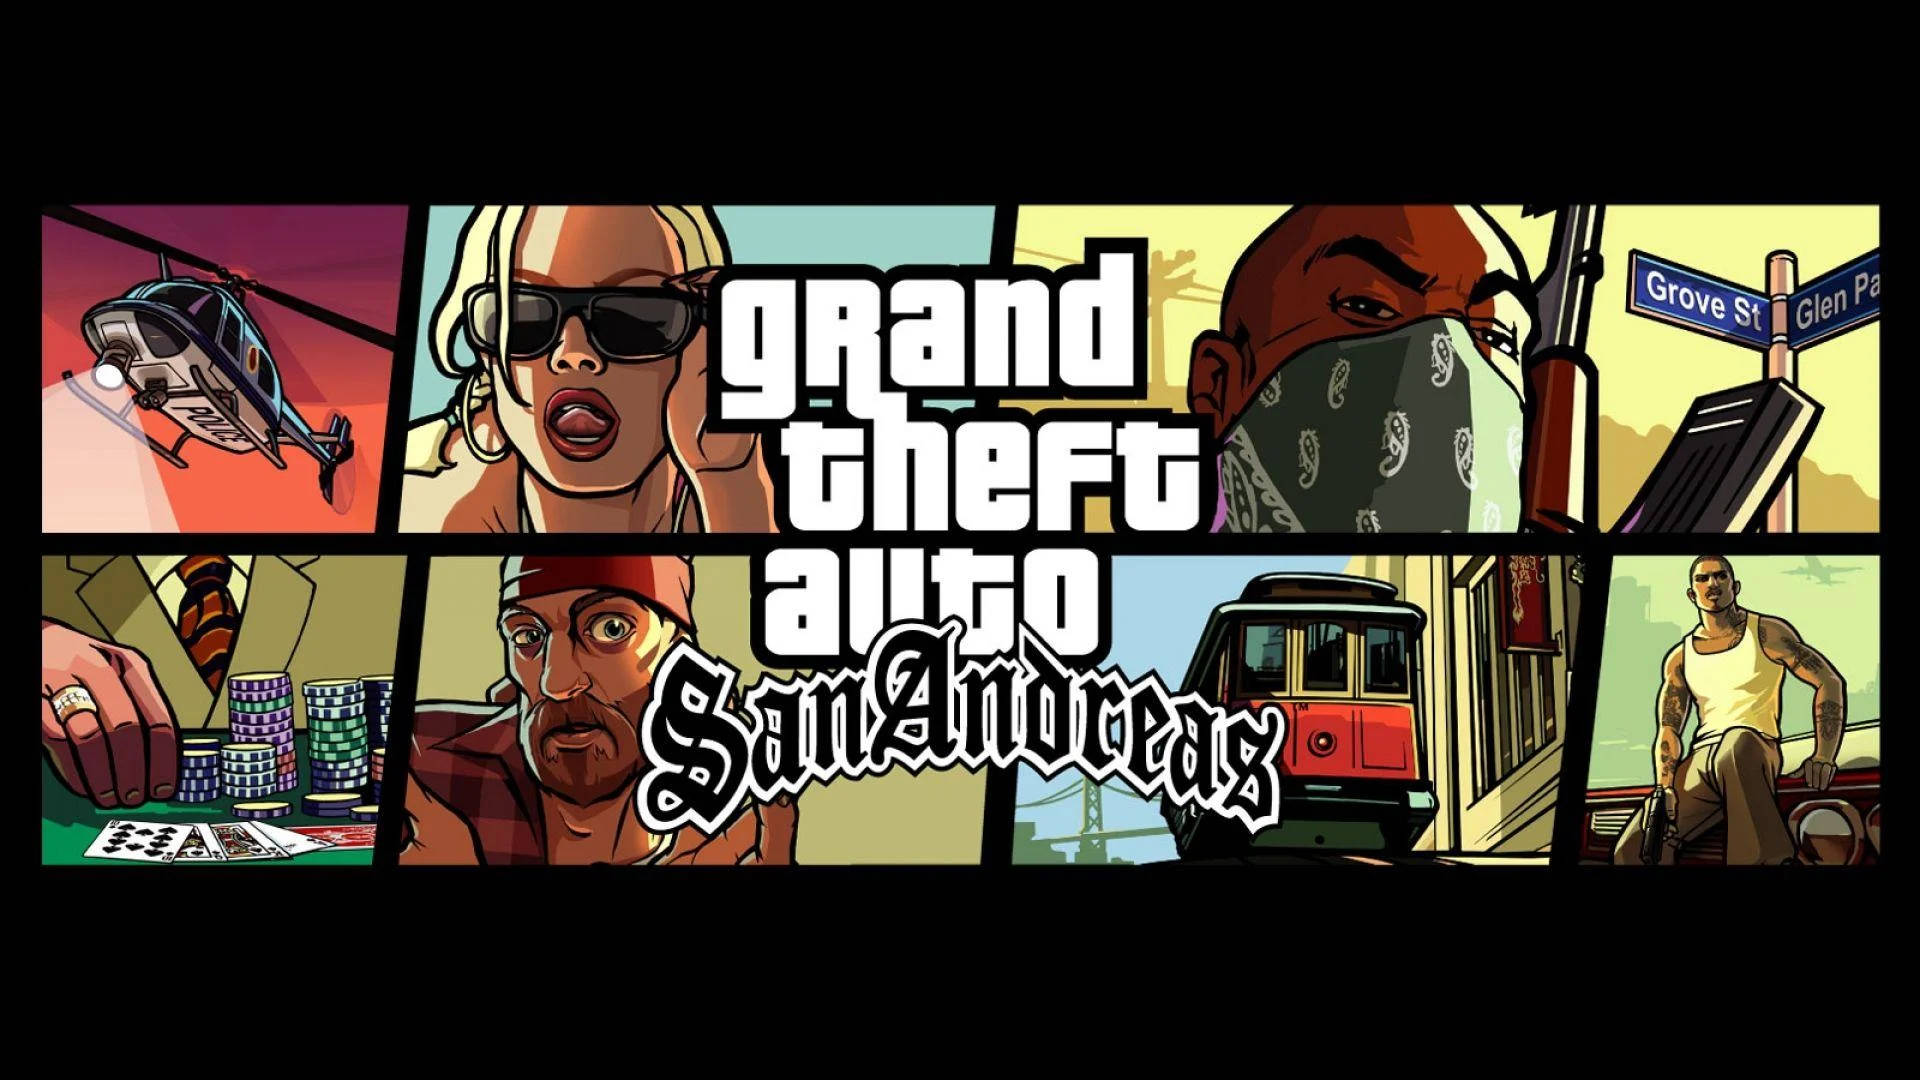 Stunning 4k Game Poster Of Grand Theft Auto: San Andreas Background